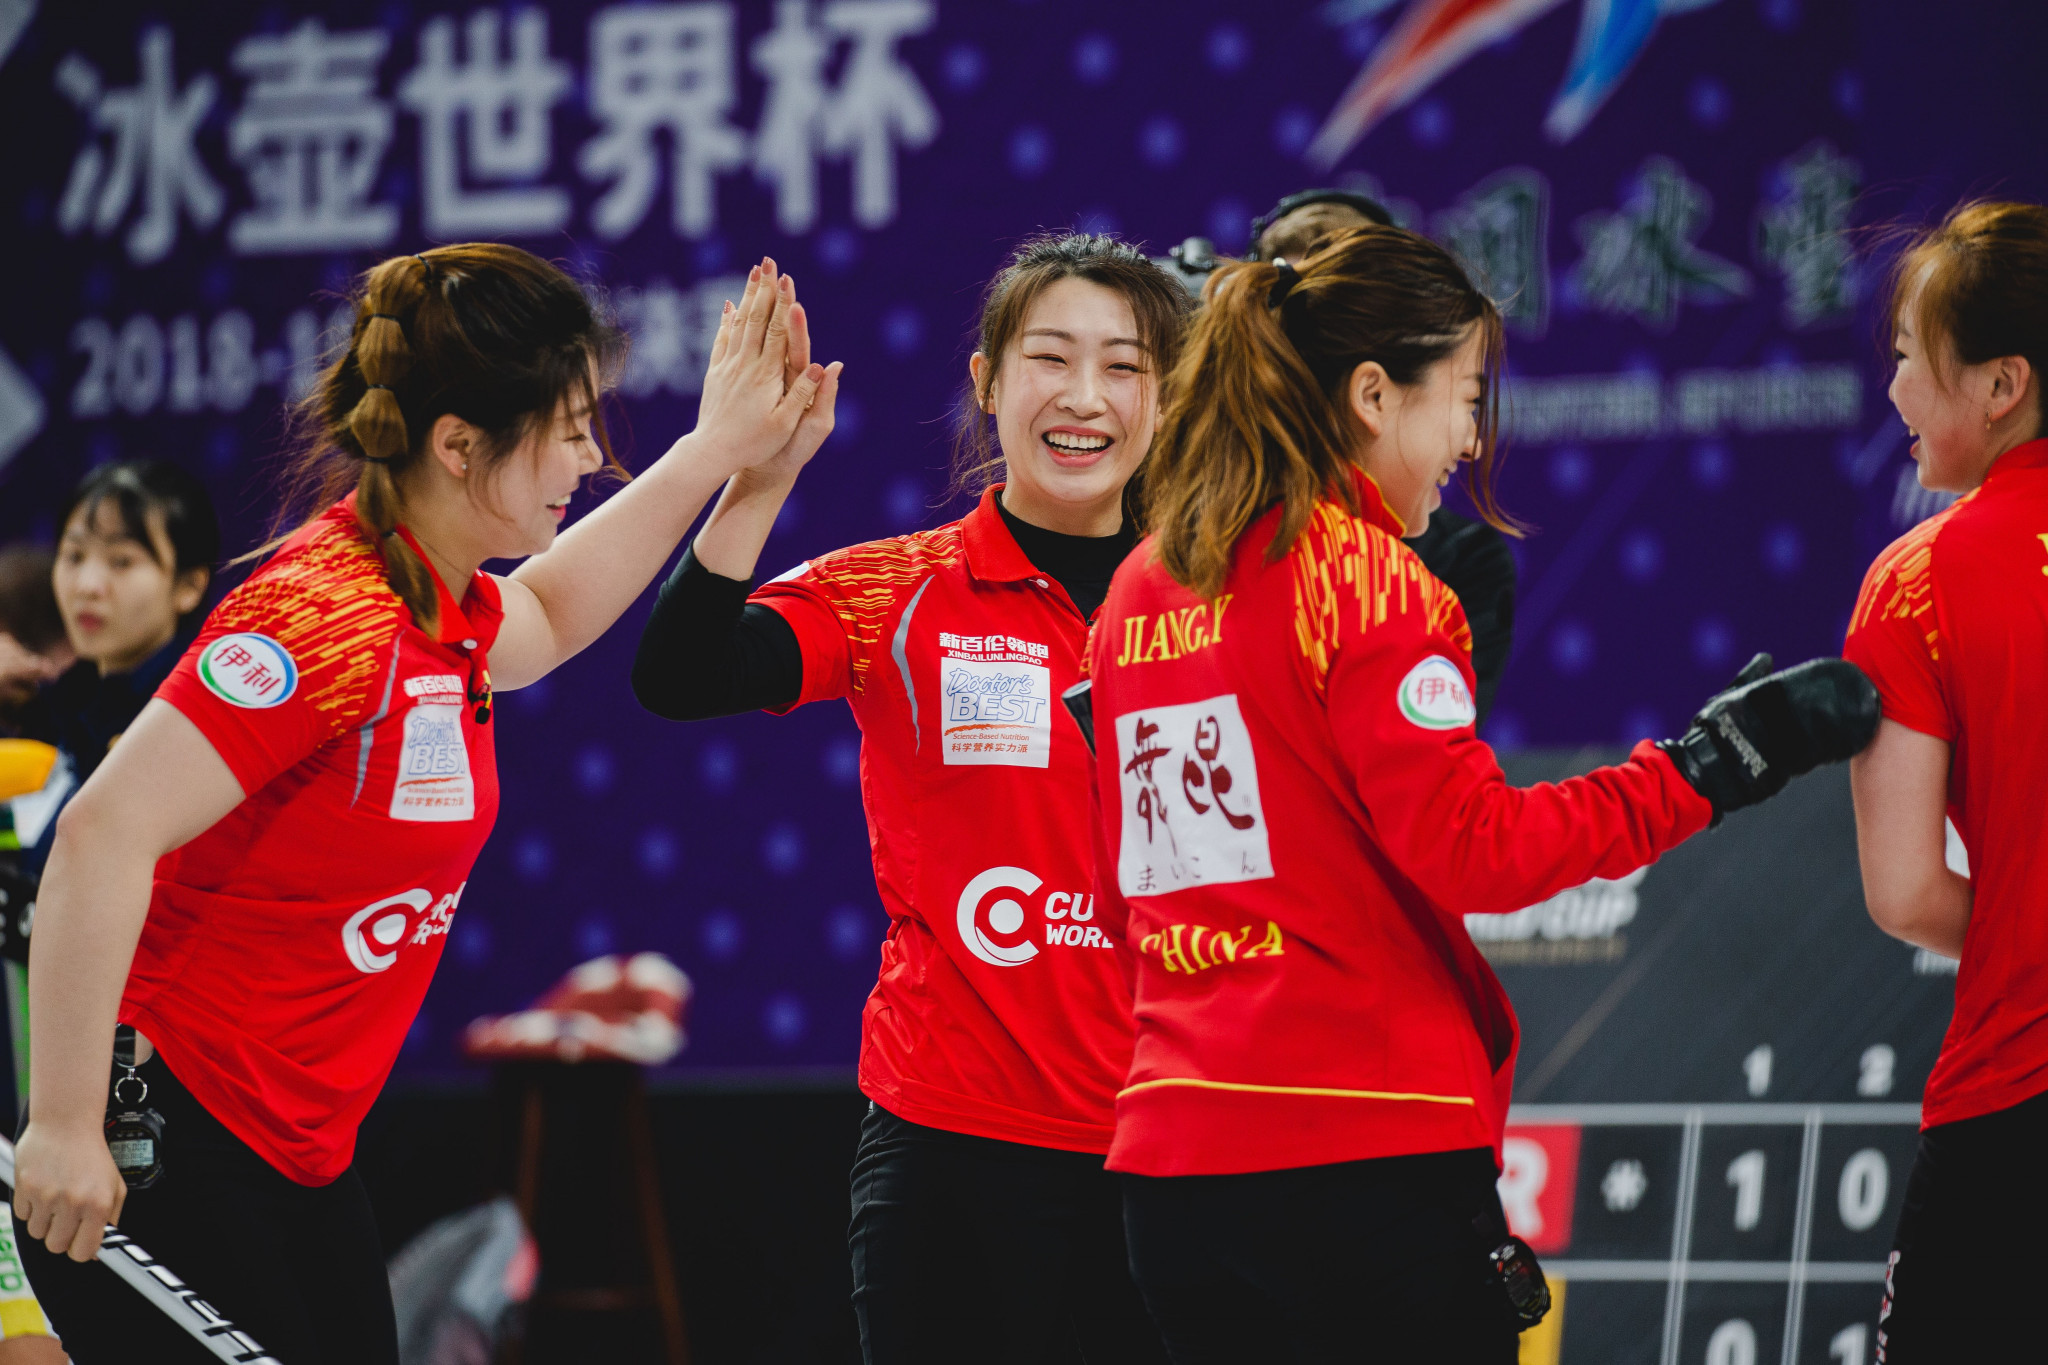 The hosts delighted the home crowd with a victory against the US at the Curling World Cup grand final in Beijing ©World Curling Federation 